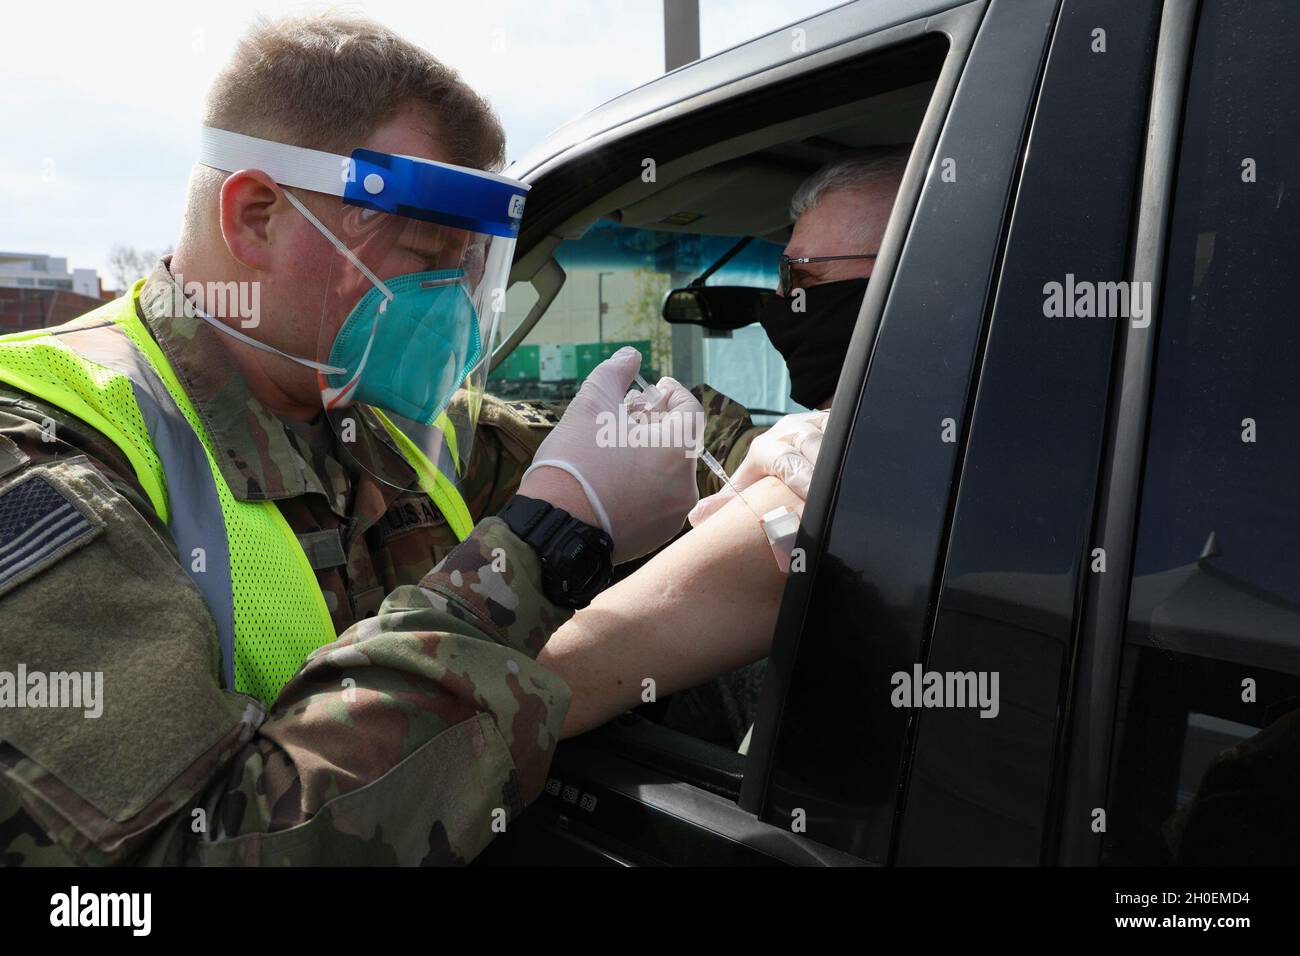 U.S. Army Pfc. William Towne, a combat medic specialist with 4th Battalion, 9th Infantry Regiment, administers a COVD-19 vaccine to a community member at California State University, Los Angeles, Feb. 15, 2021. The site is the first vaccination distribution center operating under a joint effort between federal and state agencies. Stock Photo